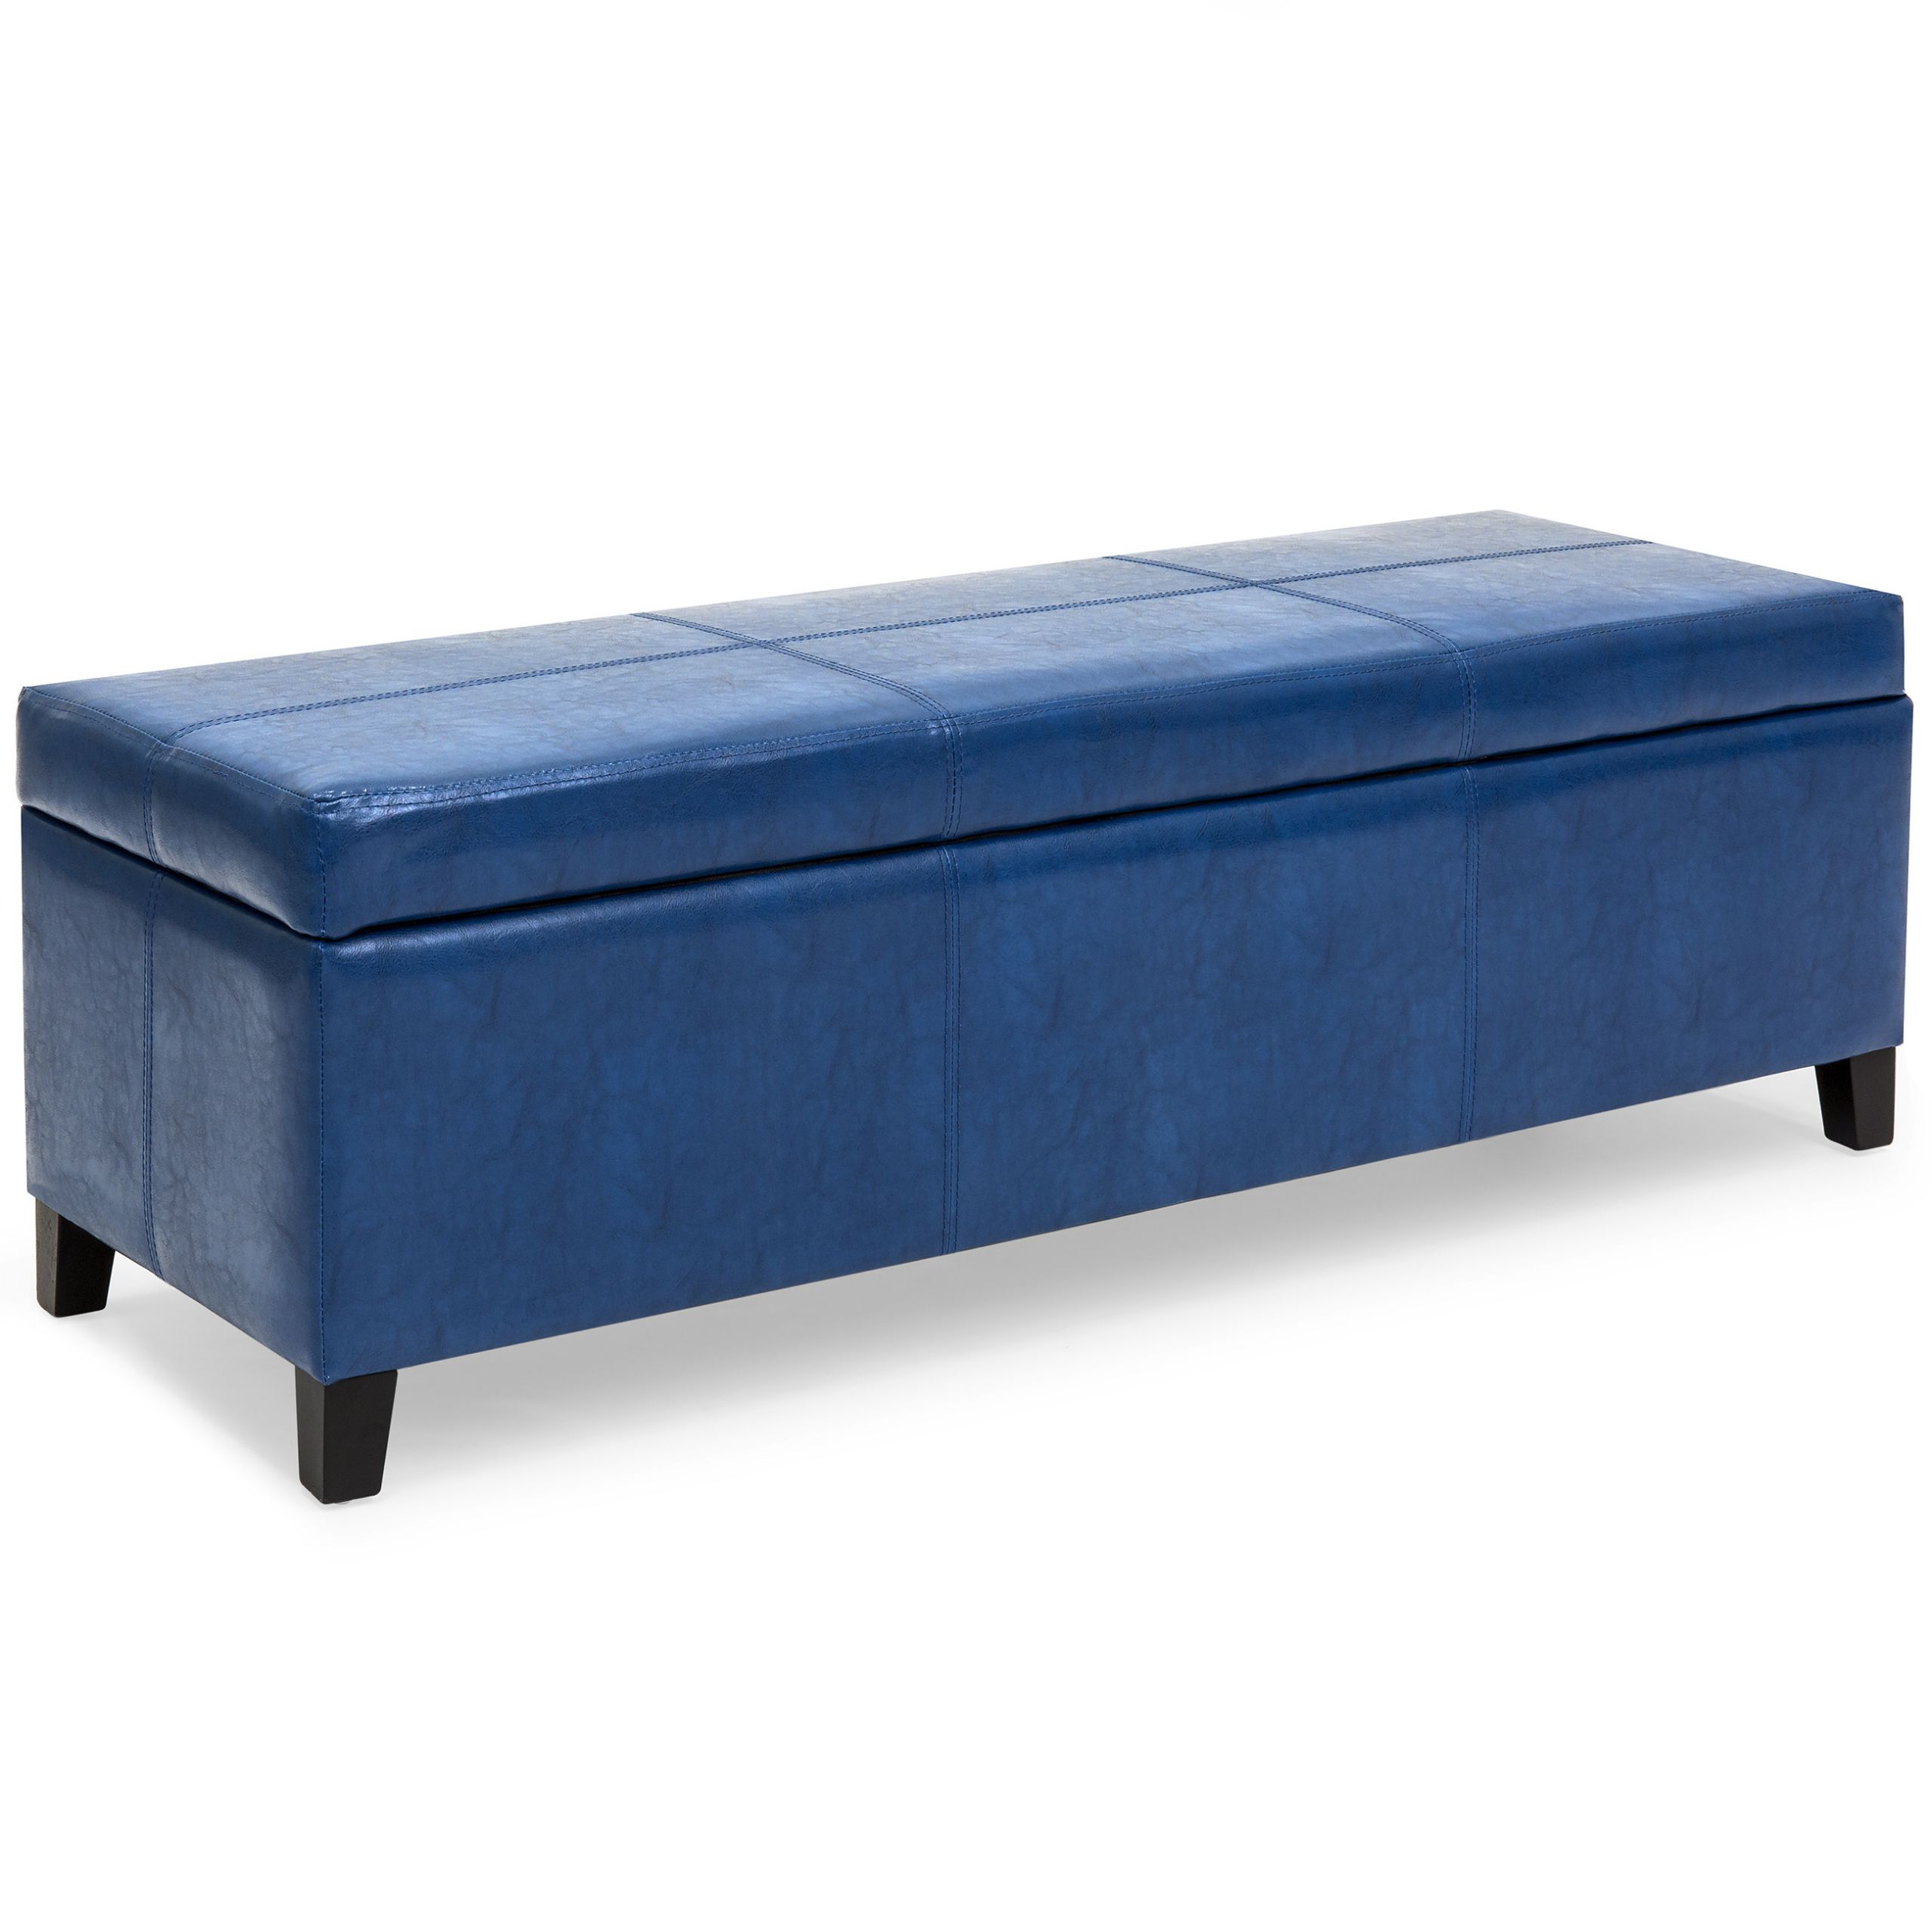 Wooden Storage Ottoman Bench
 Best Choice Products Upholstered PU Leather Storage